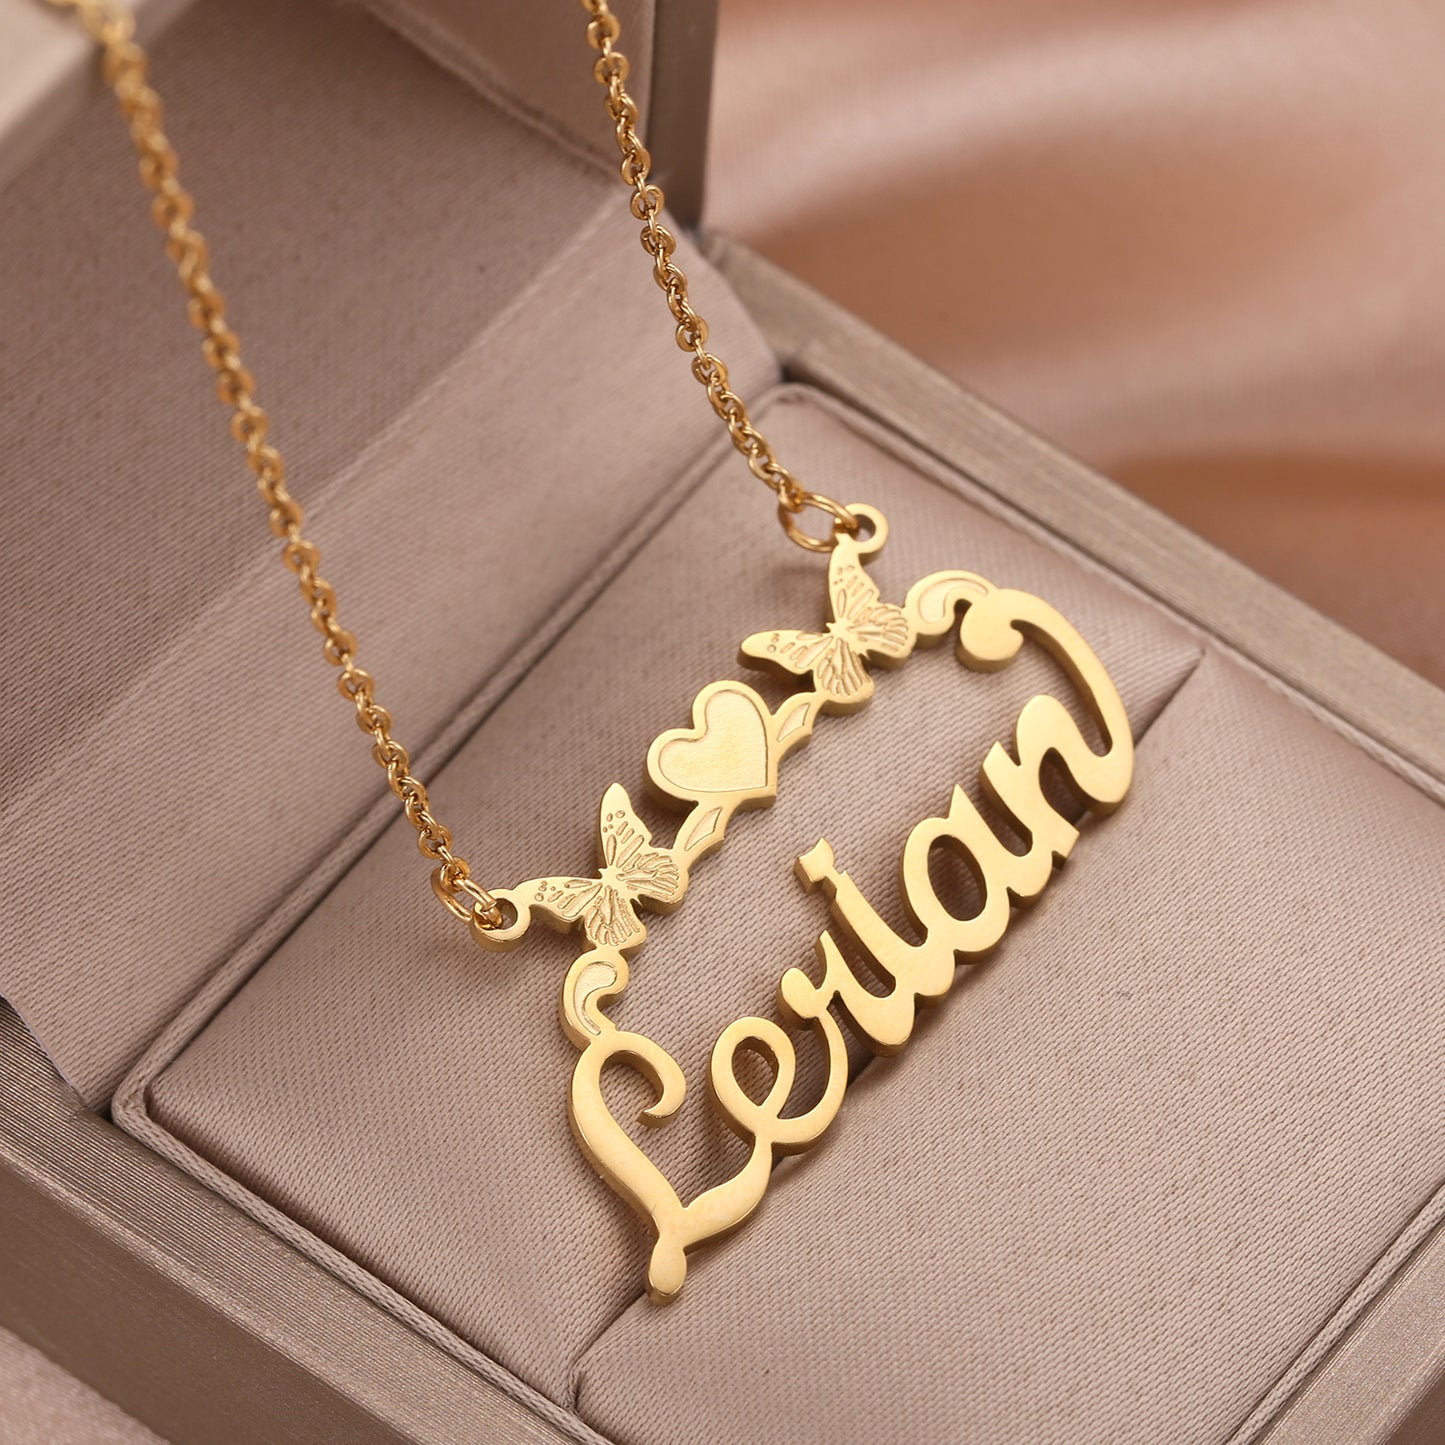 Personalised Single Name Necklace - Ribbon, Butterflies & Hearts Custom For Her Cute Unique Jewellery Gift in Arabic or English -  Anaya